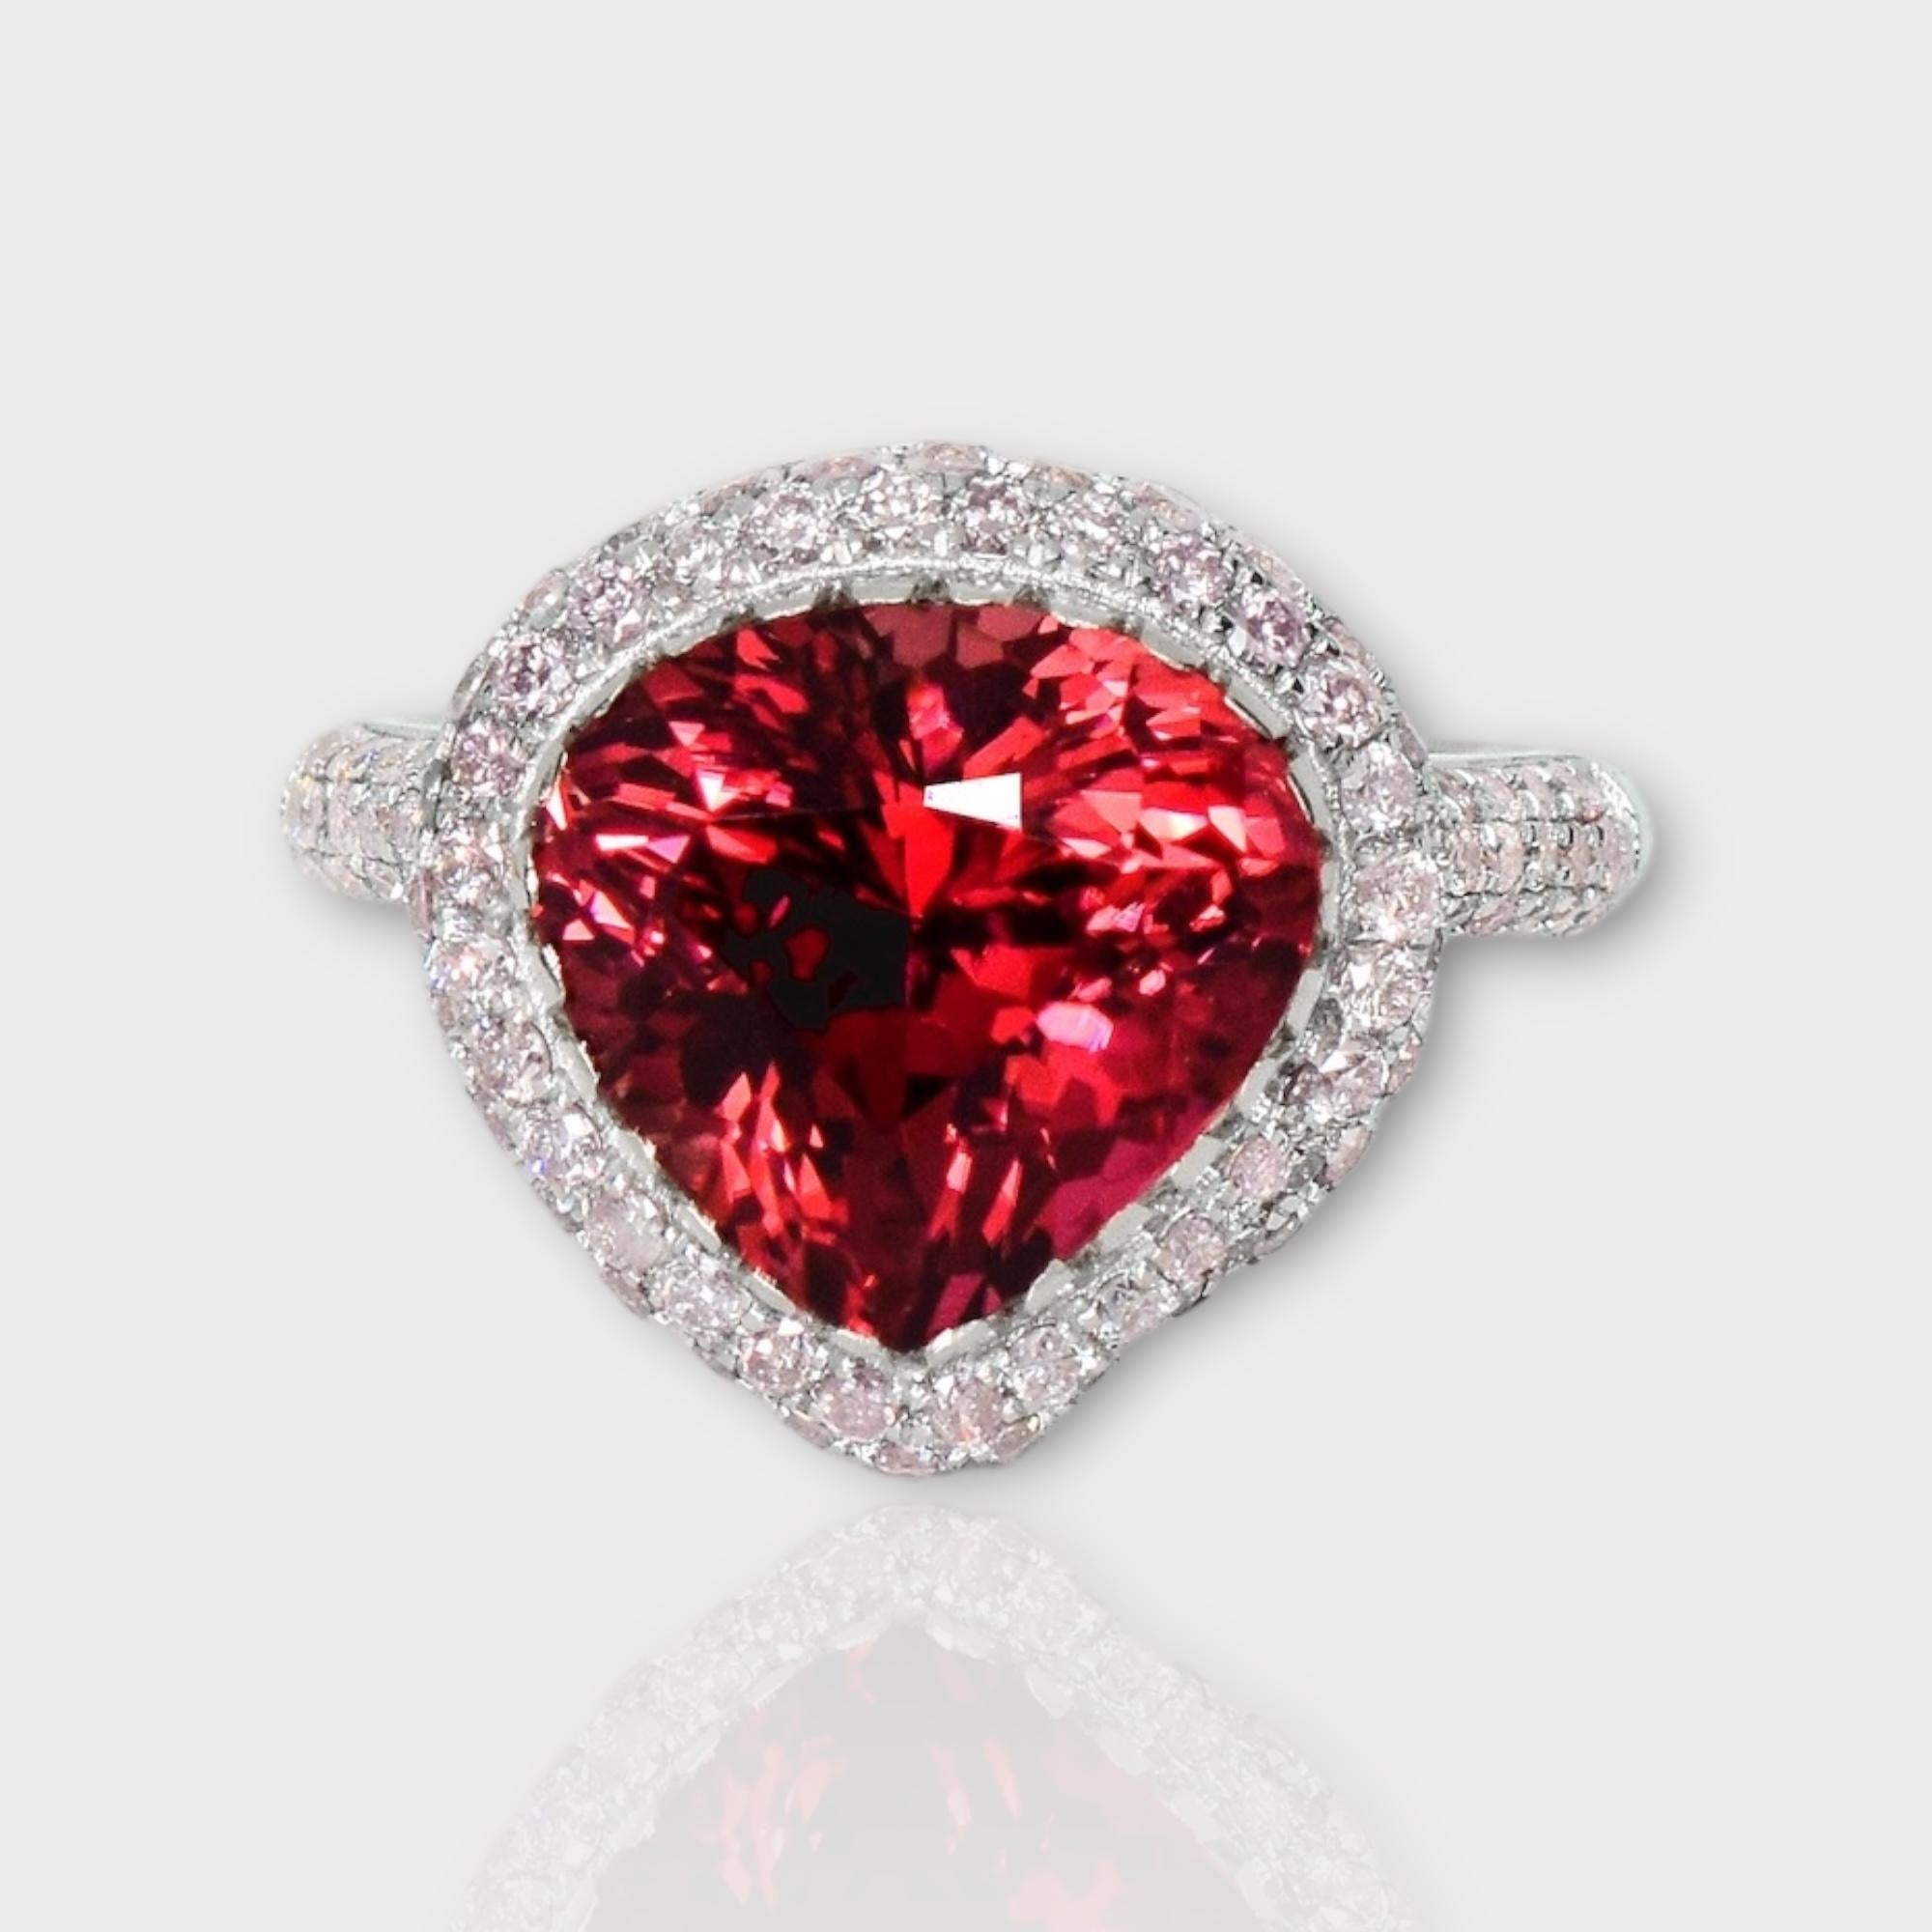 *GIA 18K 5.02 Ct Top Pink Tourmaline&Pink Diamonds Antique Art Deco Style Engagement Ring*

GIA-certified natural top pink Tourmaline weighing 5.02 ct is set on an 18K white gold pave band with natural pink diamonds weighing 1.31 ct.

As a healing